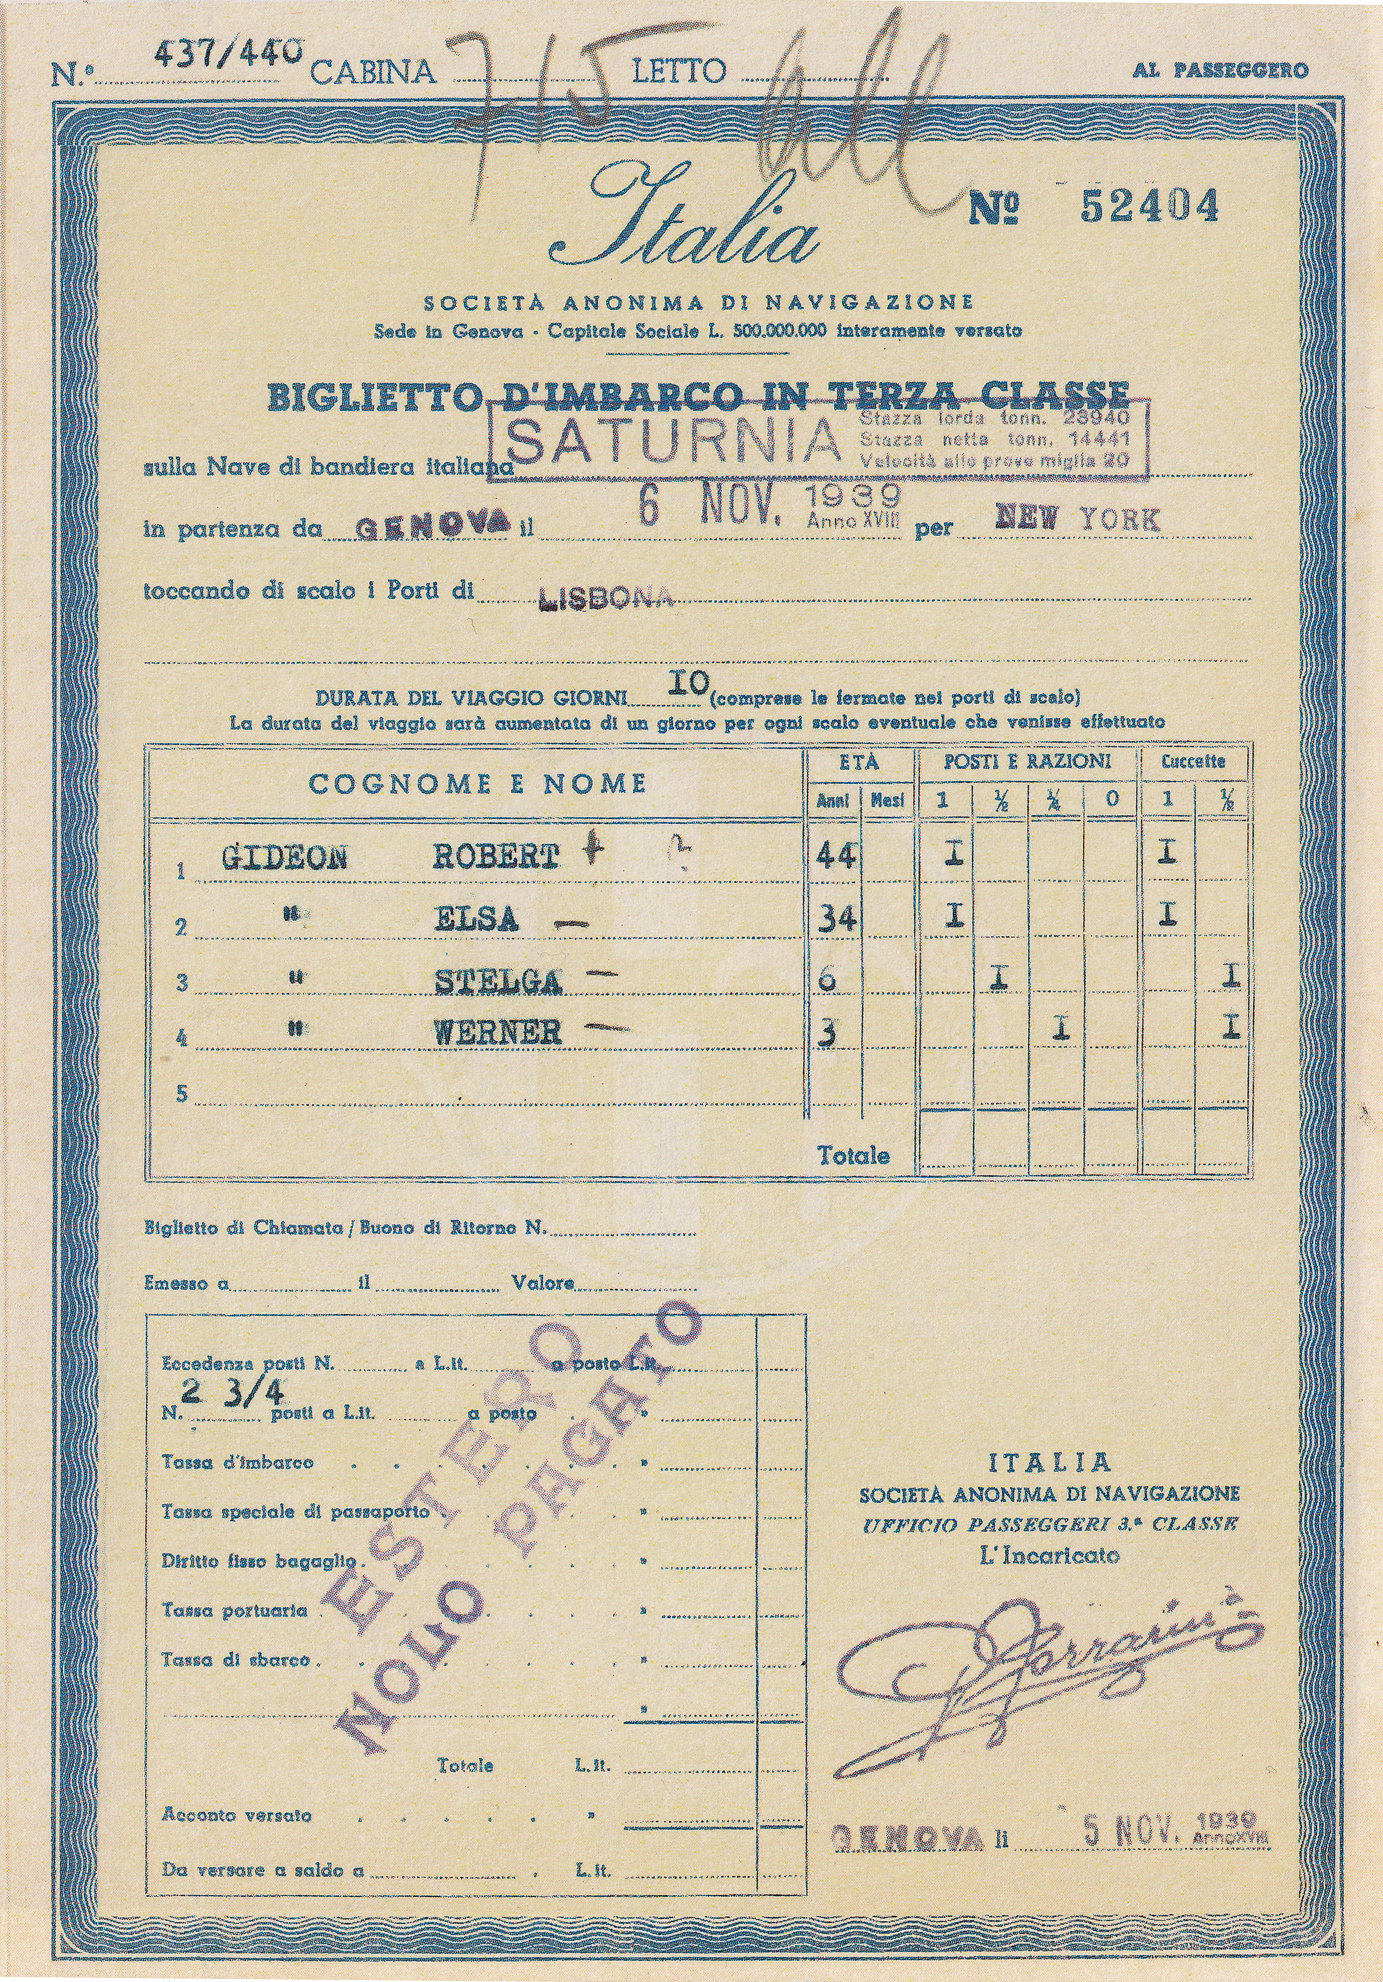 Third class ship's ticket in Italian issued to Robert and Elsa Gideon with Werner and Helga on November 5, 1939.